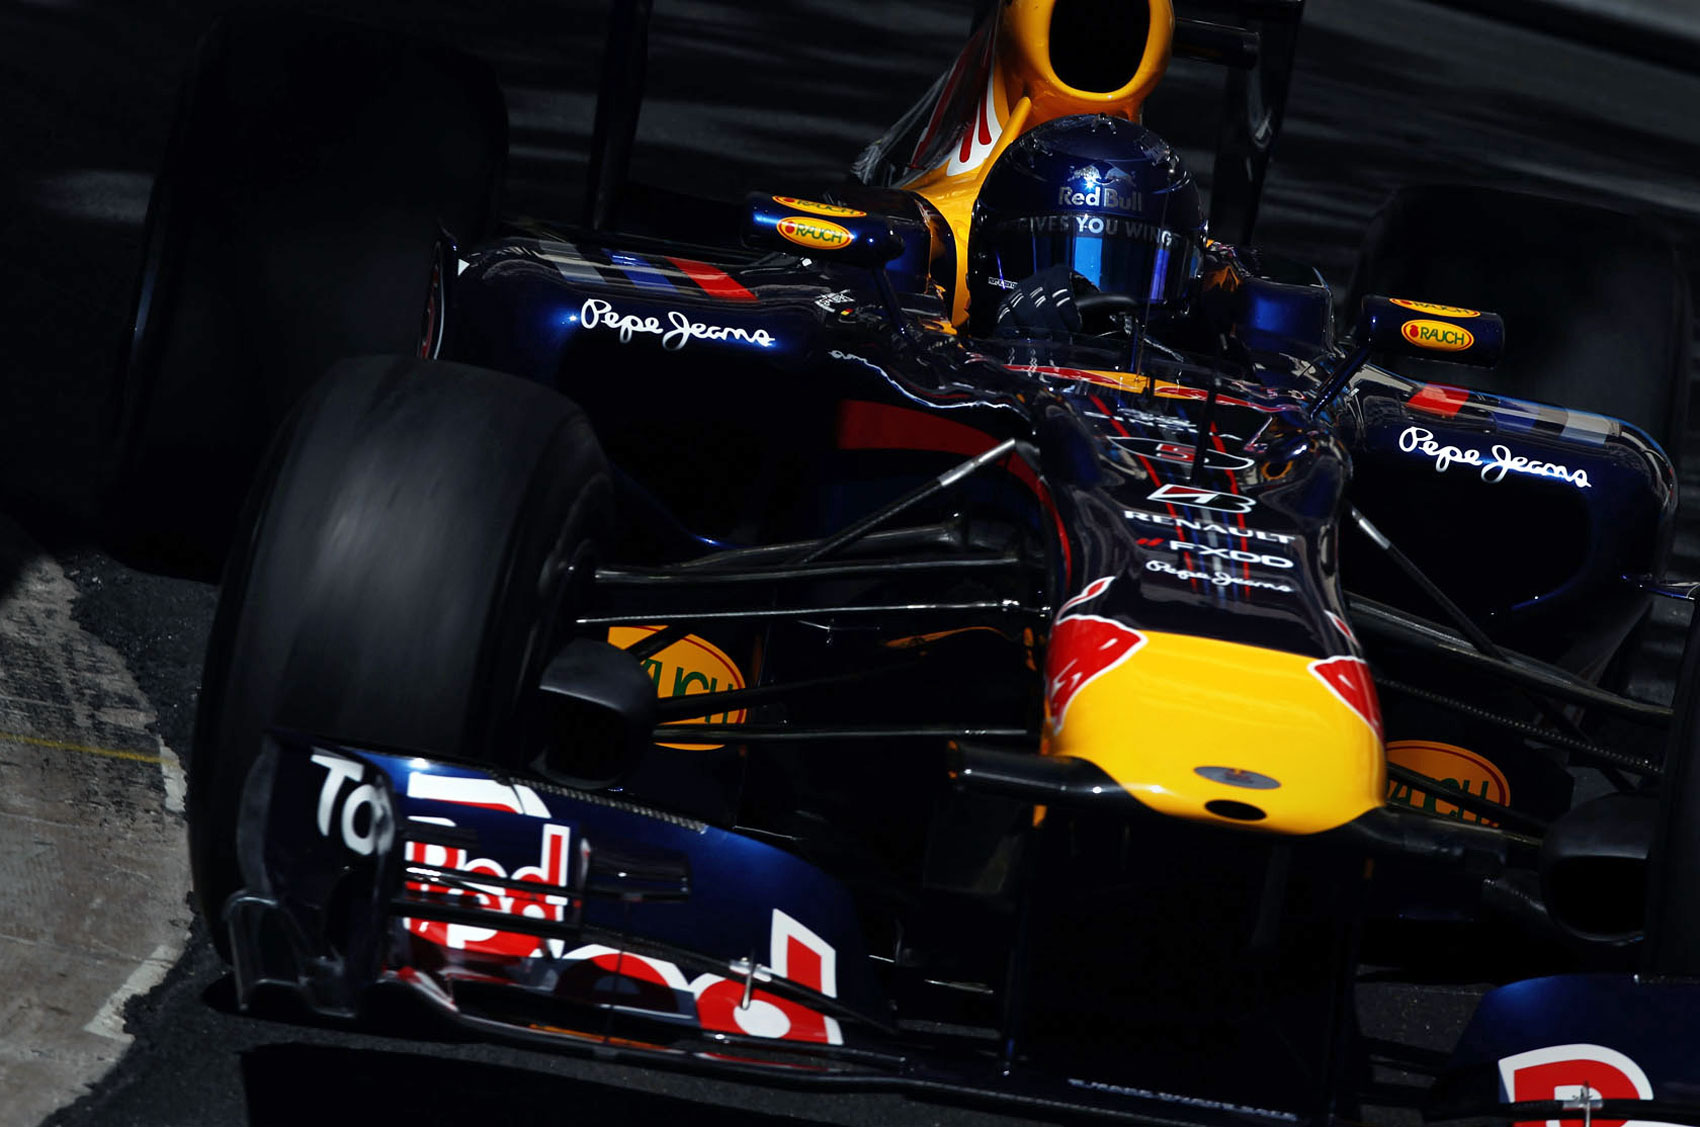 Free Download Red Bull Racing Wallpaper 1700x1127 For Your Desktop Mobile Tablet Explore 72 Red Bull Racing Wallpaper Red Bull Wallpaper Red Bull Ktm Wallpaper Red X Wallpaper